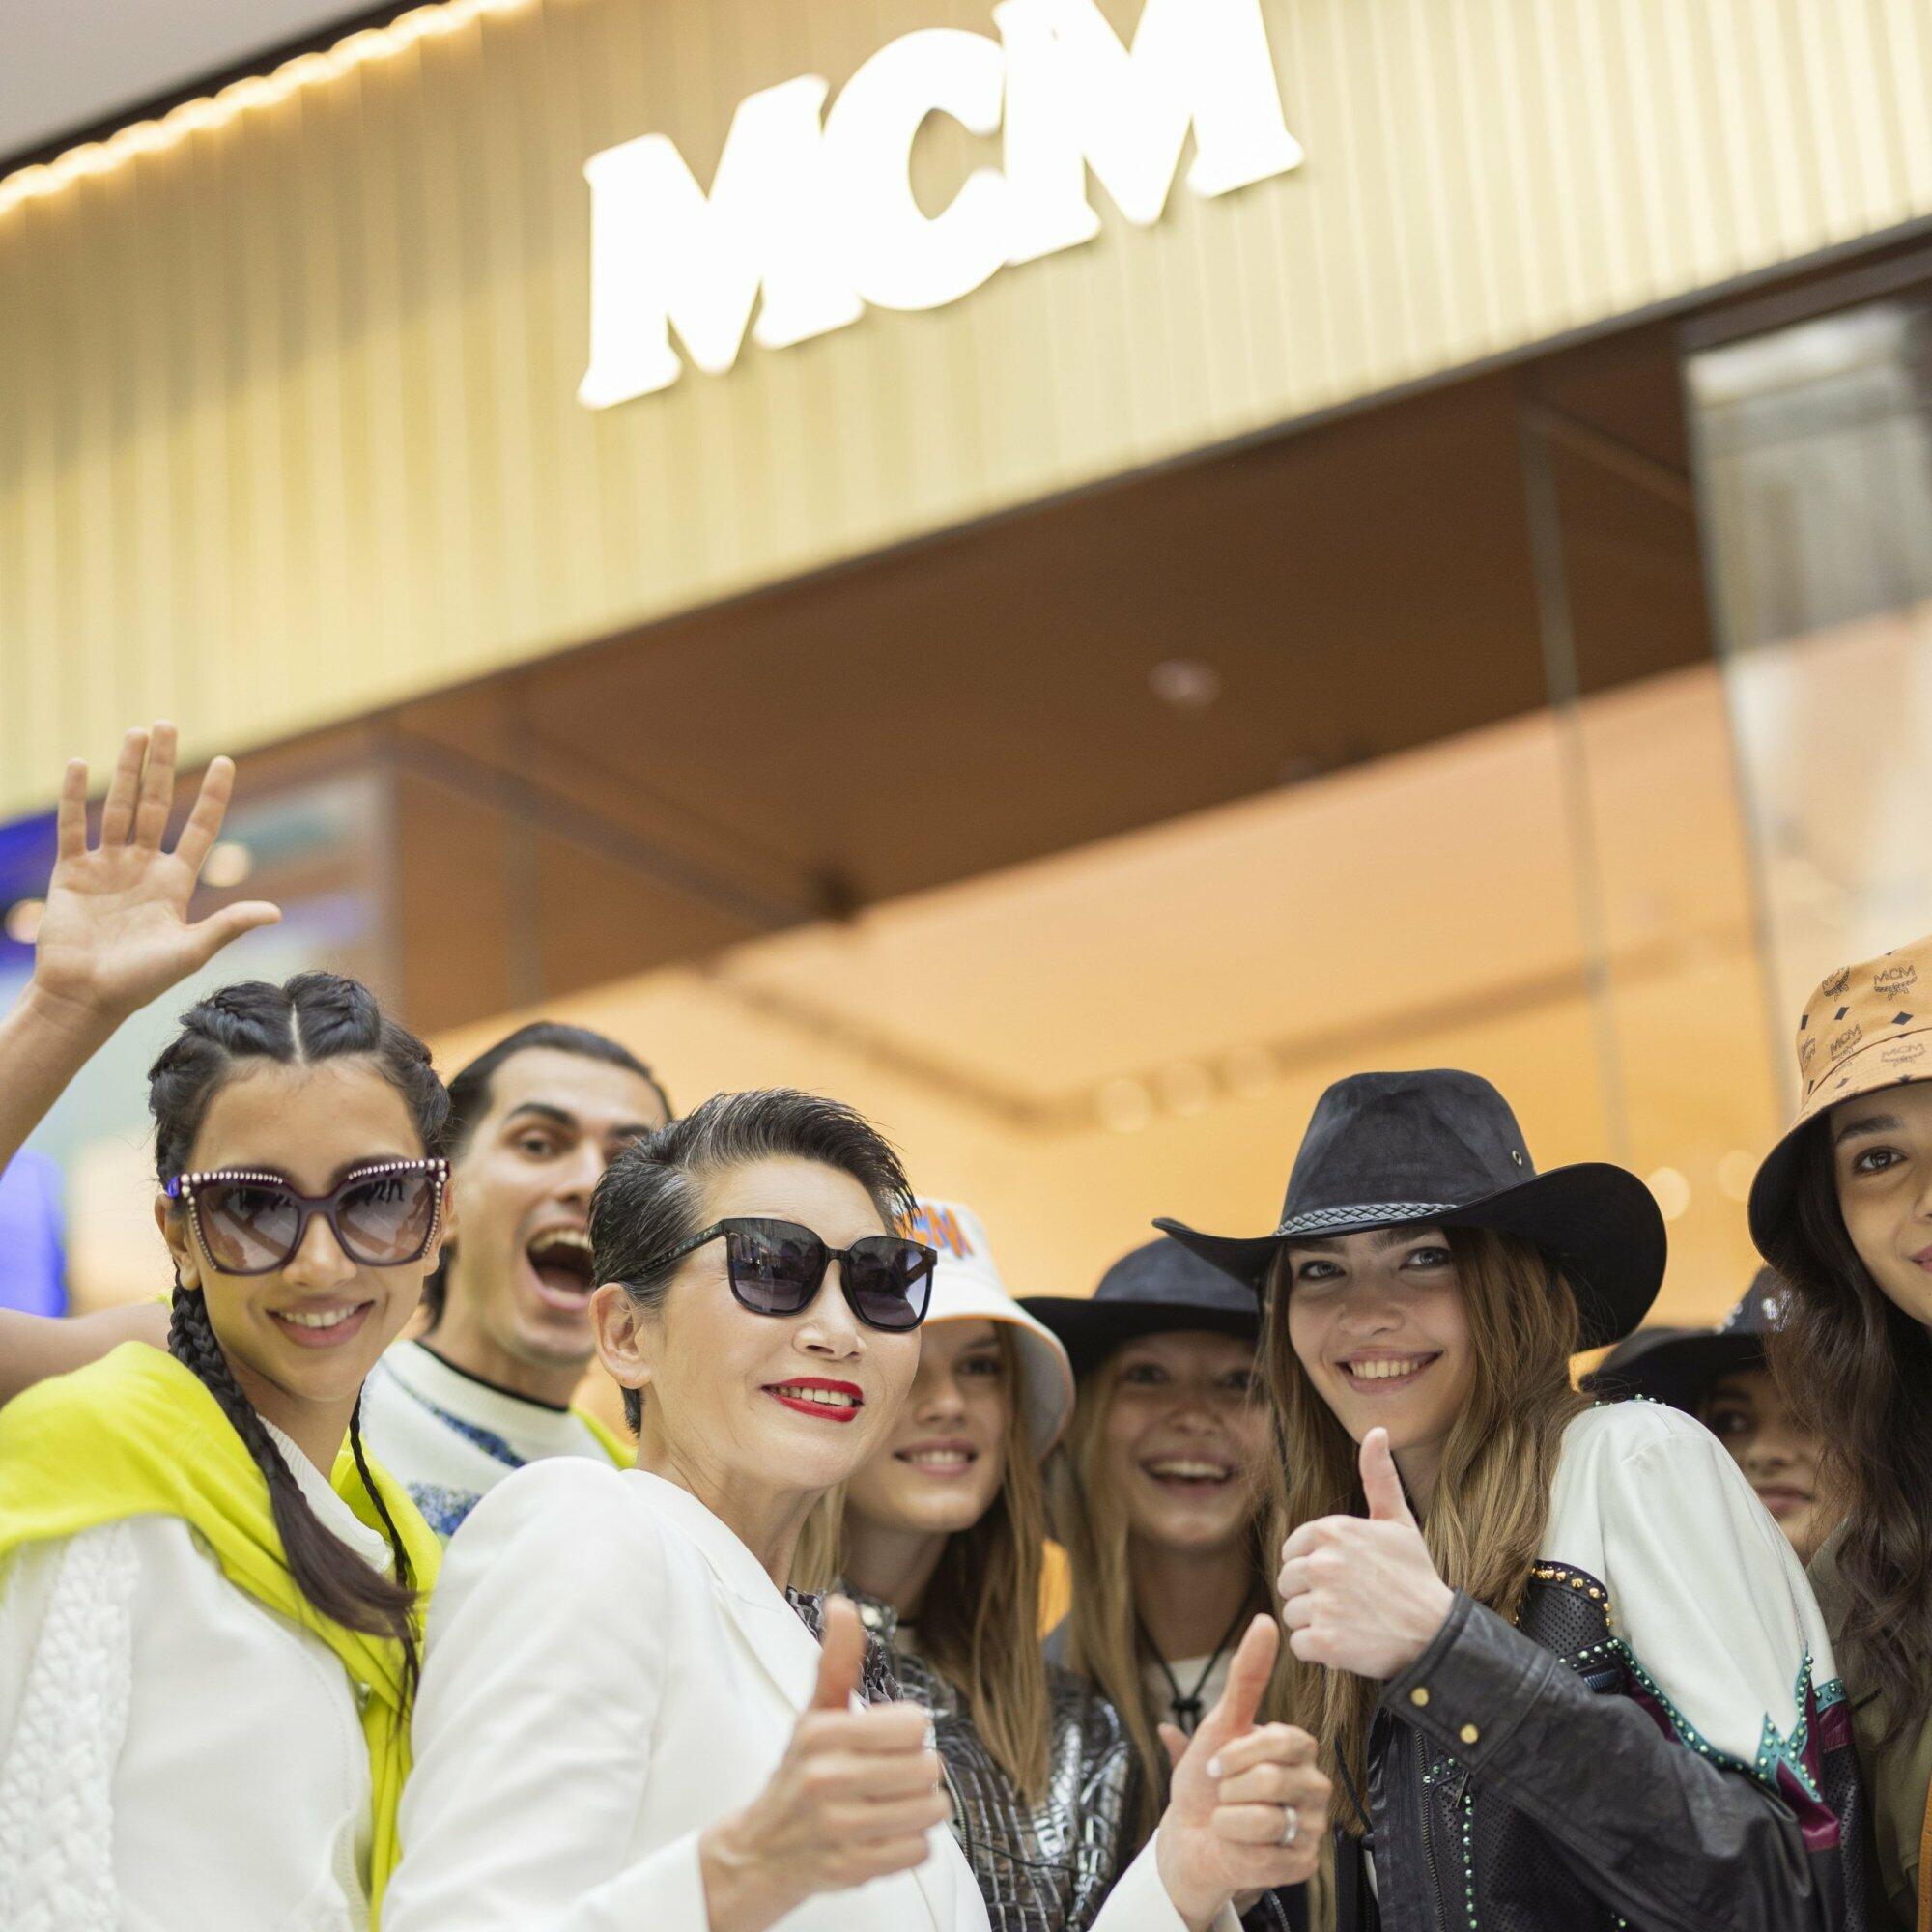 Fashiontainment, and why MCM?